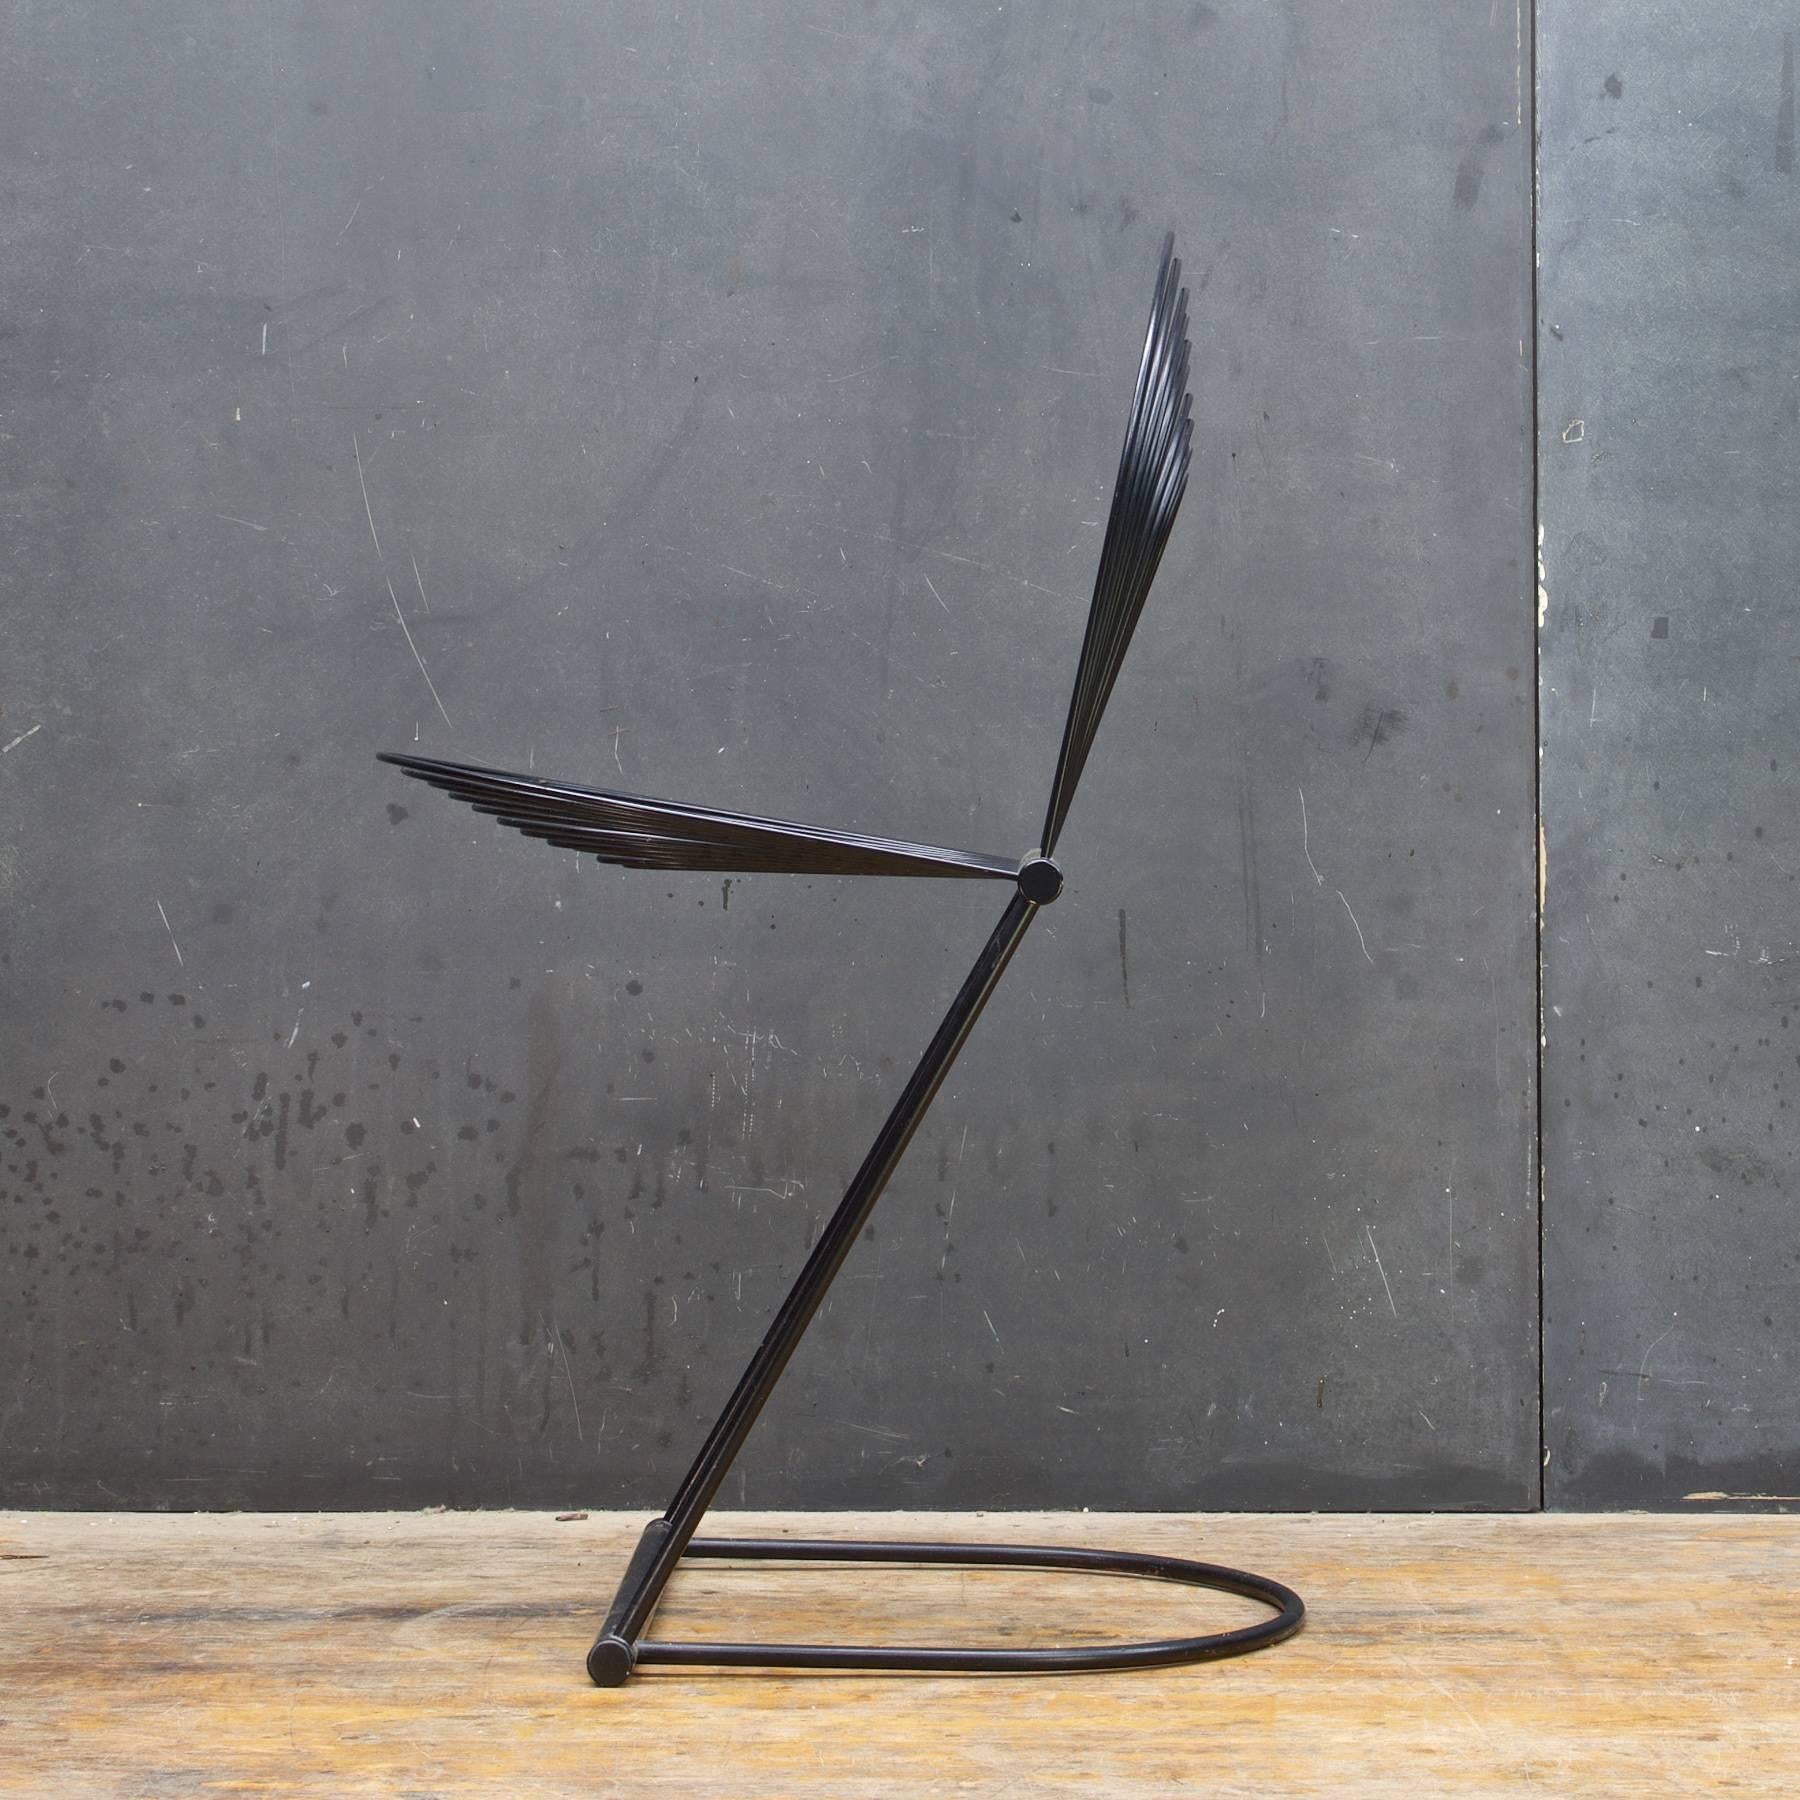 Germany, 1982.  Black enamel on aluminum, spring steel.  Jutta and Herbert Ohl, for Rosenthal Studio Linie Einrichtung.  Cantilever chair from the “Swing” Series.  